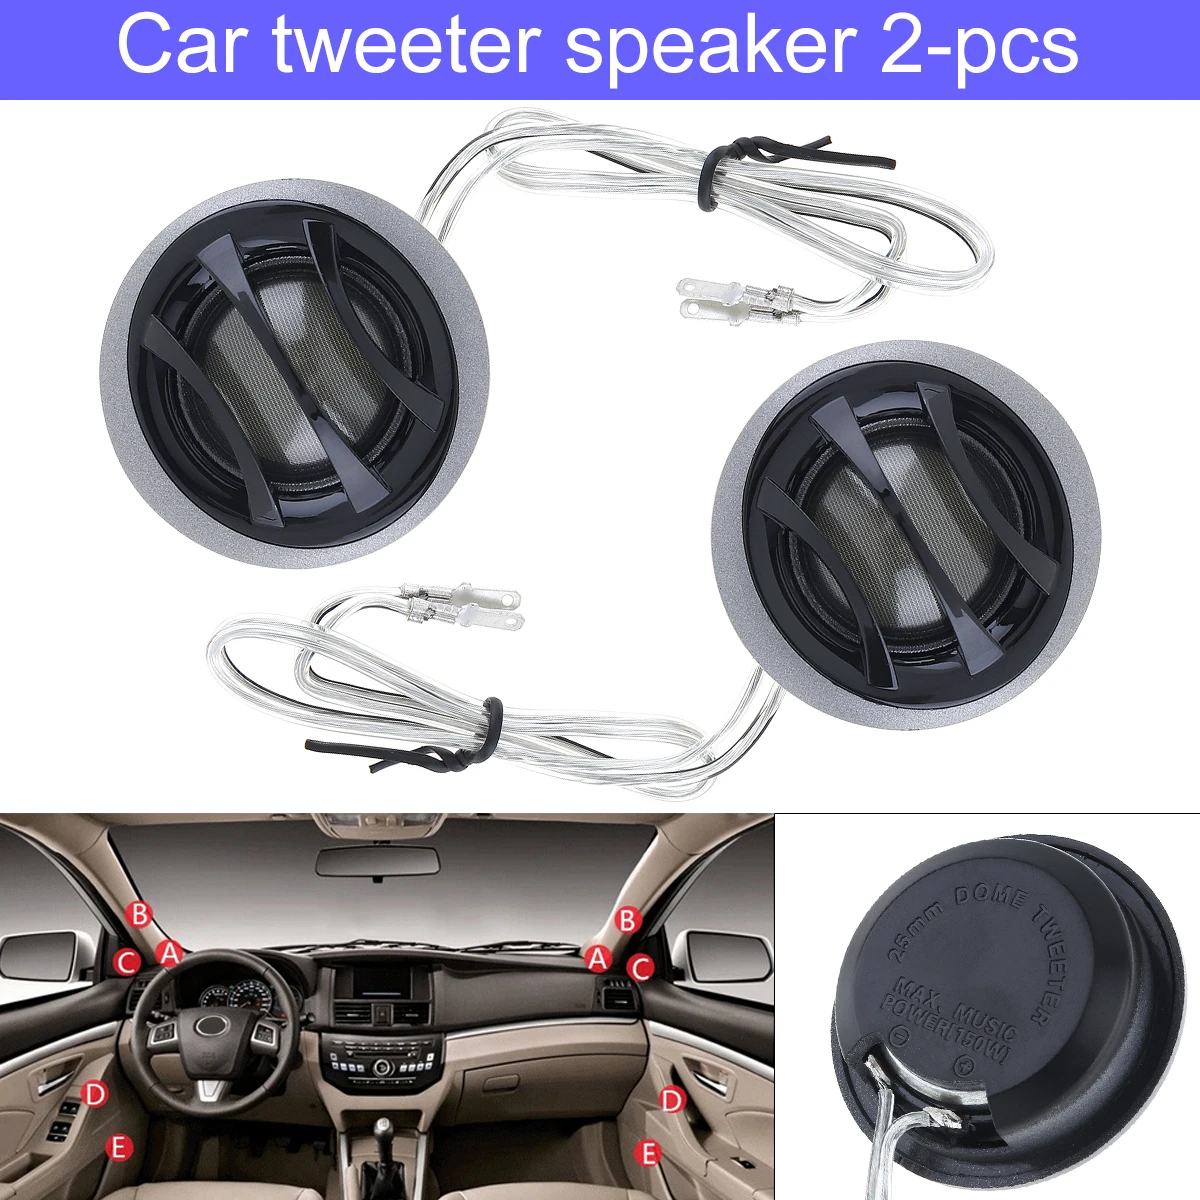 

2pcs 1.5 Inch 150W Car Speaker A160 High Efficiency Mini Dome Tweeter Speakers Music Loundspeaker for Car Auto Audio Systems